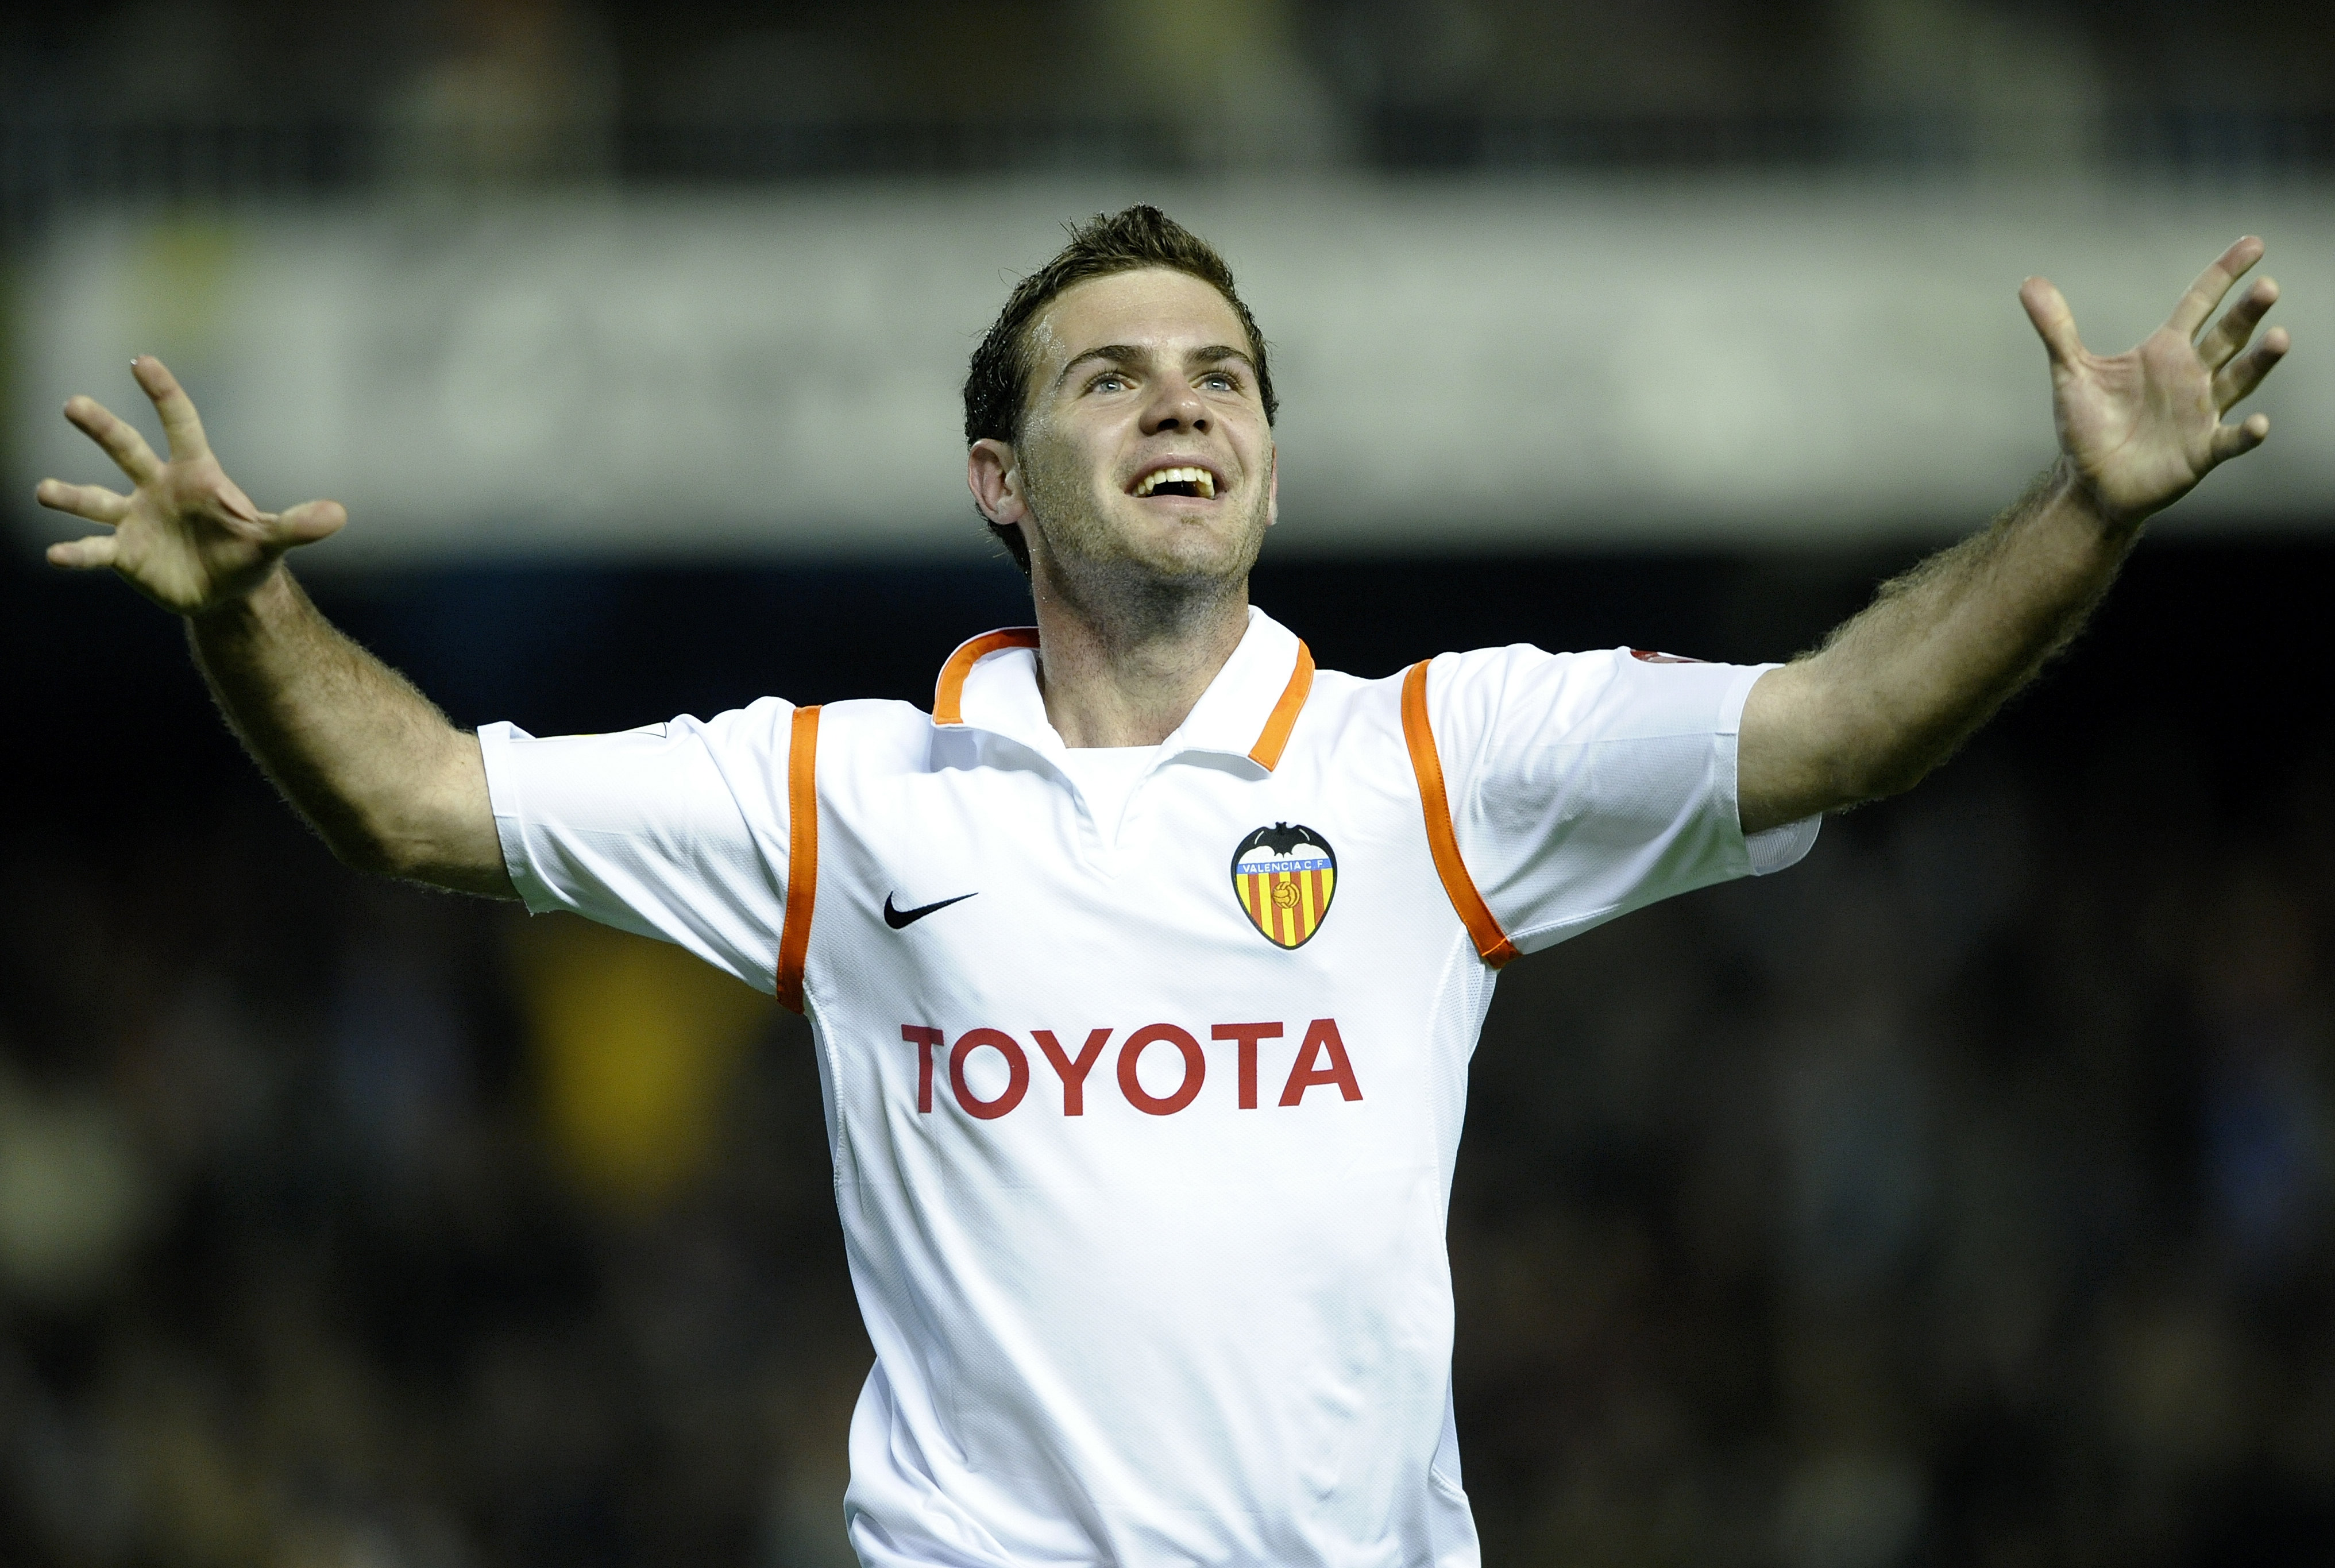 VALENCIA, SPAIN - MARCH 20:  Juan Mata of Valencia celebrates the third goal during the Copa del Rey Semi Final 2nd leg match between Valencia and Barcelona at the Mestalla stadium on March 20, 2008 in Valencia, Spain.  (Photo by Manuel Queimadelos Alonso